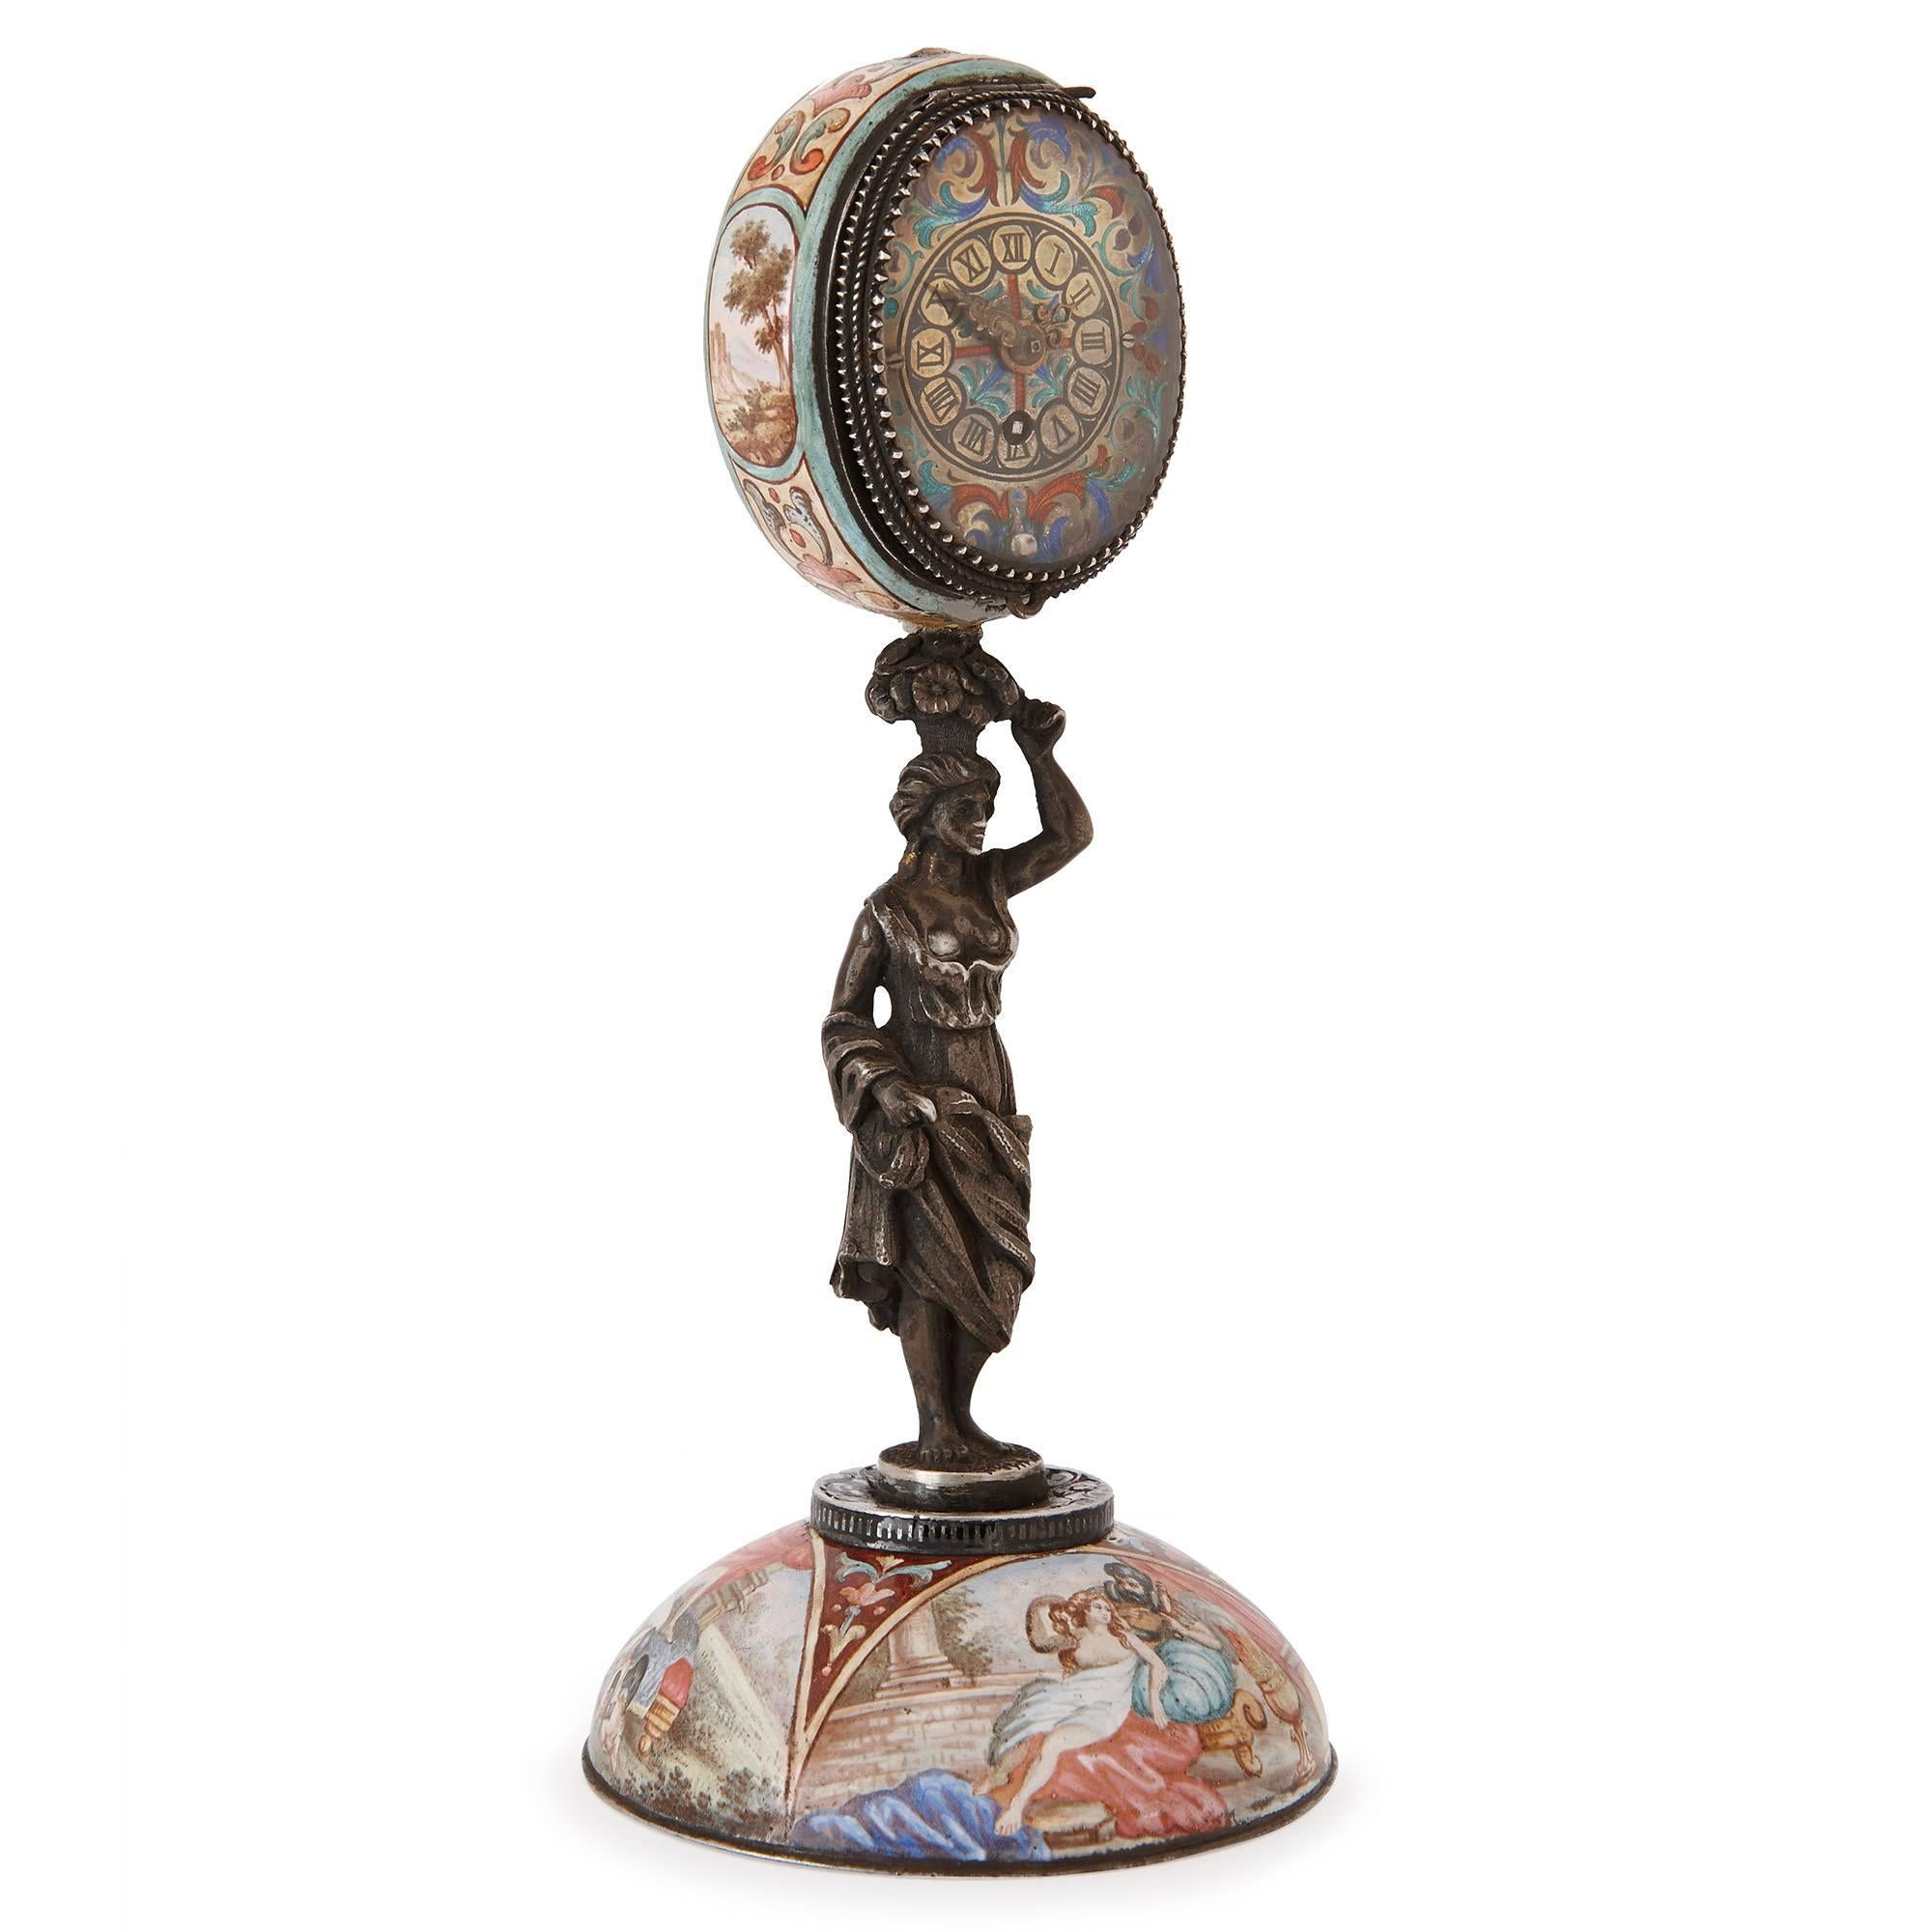 This 19th century, Austrian table clock is crafted in silver and the complex champleve enamel technique. The base of the clock is a semi-spherical dome inlaid with enamel panels of classical figures and landscapes. The central support for the clock